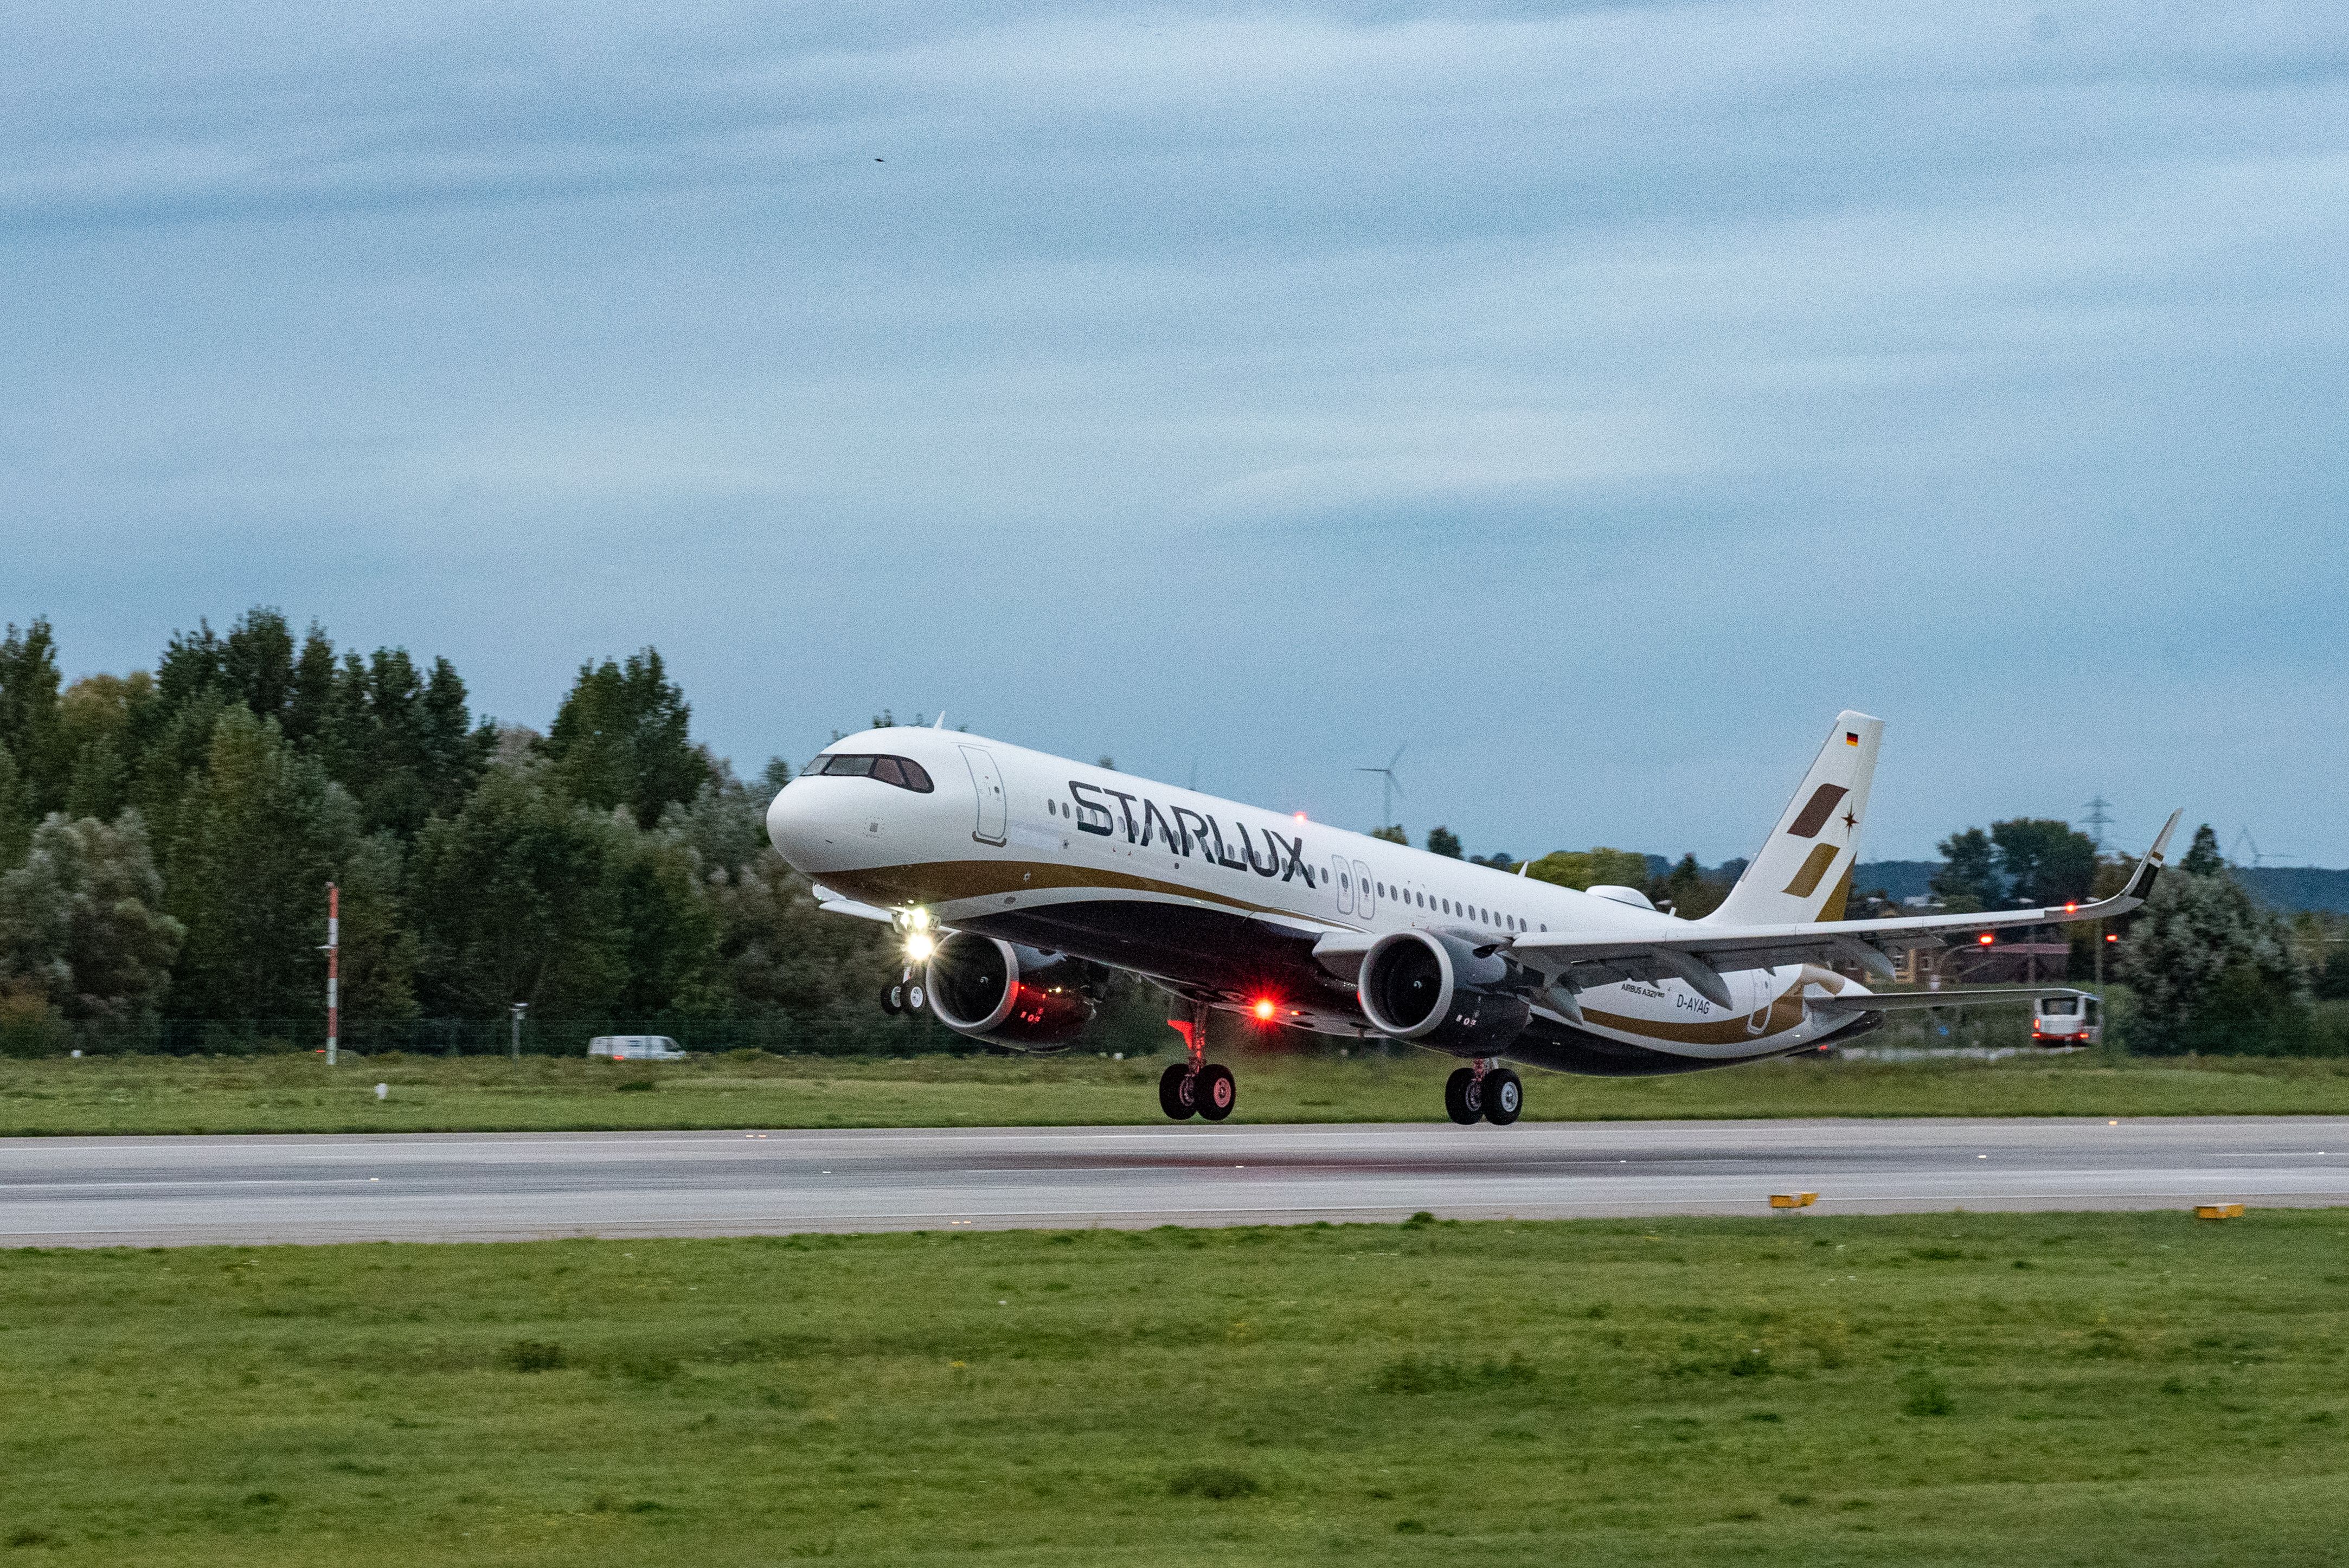 Starlux Airlines Airbus A321neo